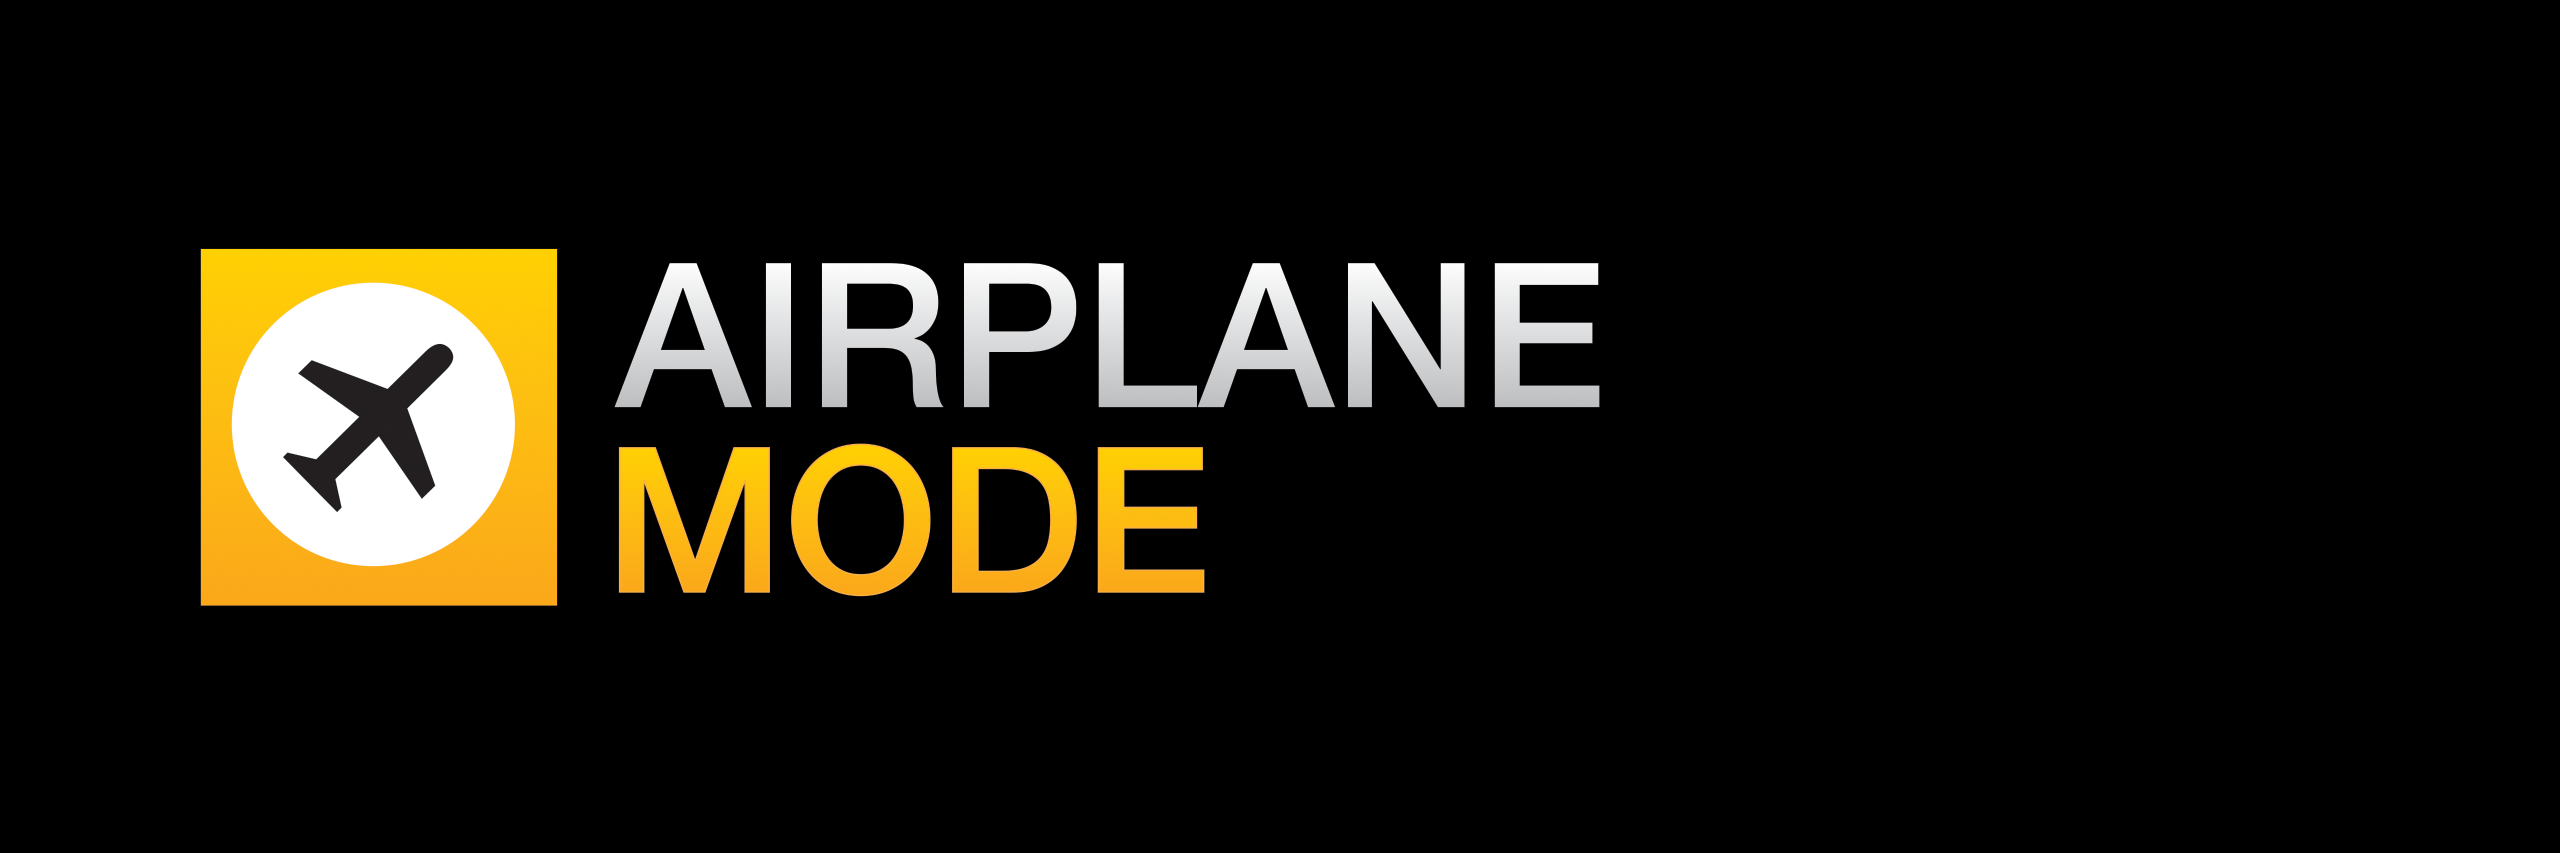 airplane mode games